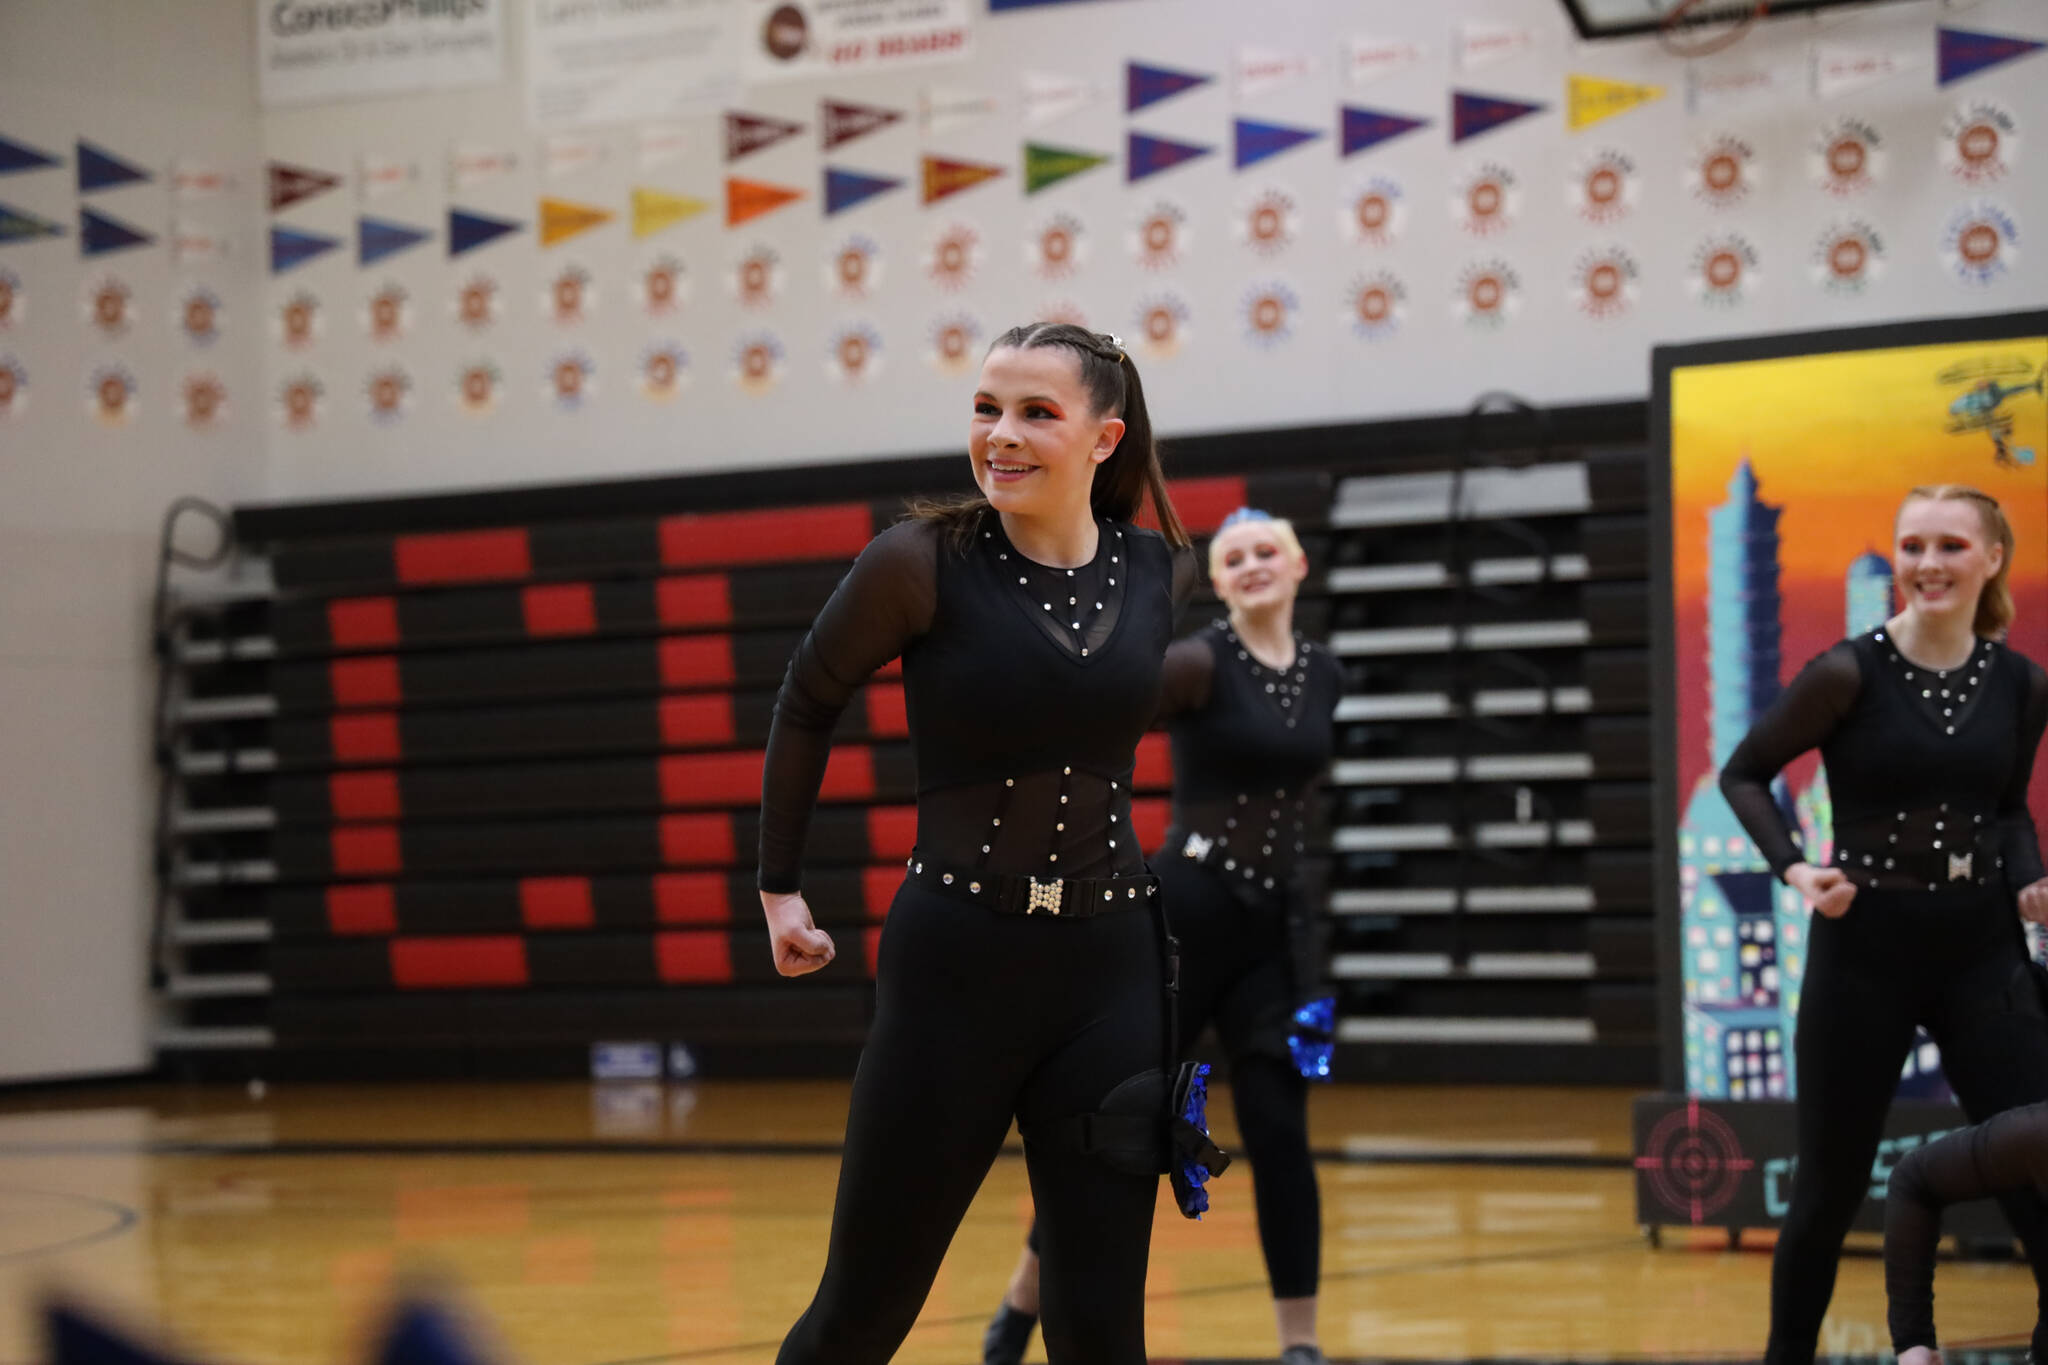 The TMHS dance team shows it’s spy skills during the annual Region V 2A/4A dance adjudication competition hosted at Juneau-Douglas High School:Yadaa.at Kalé Saturday afternoon. (Clarise Larson / Juneau Empire)